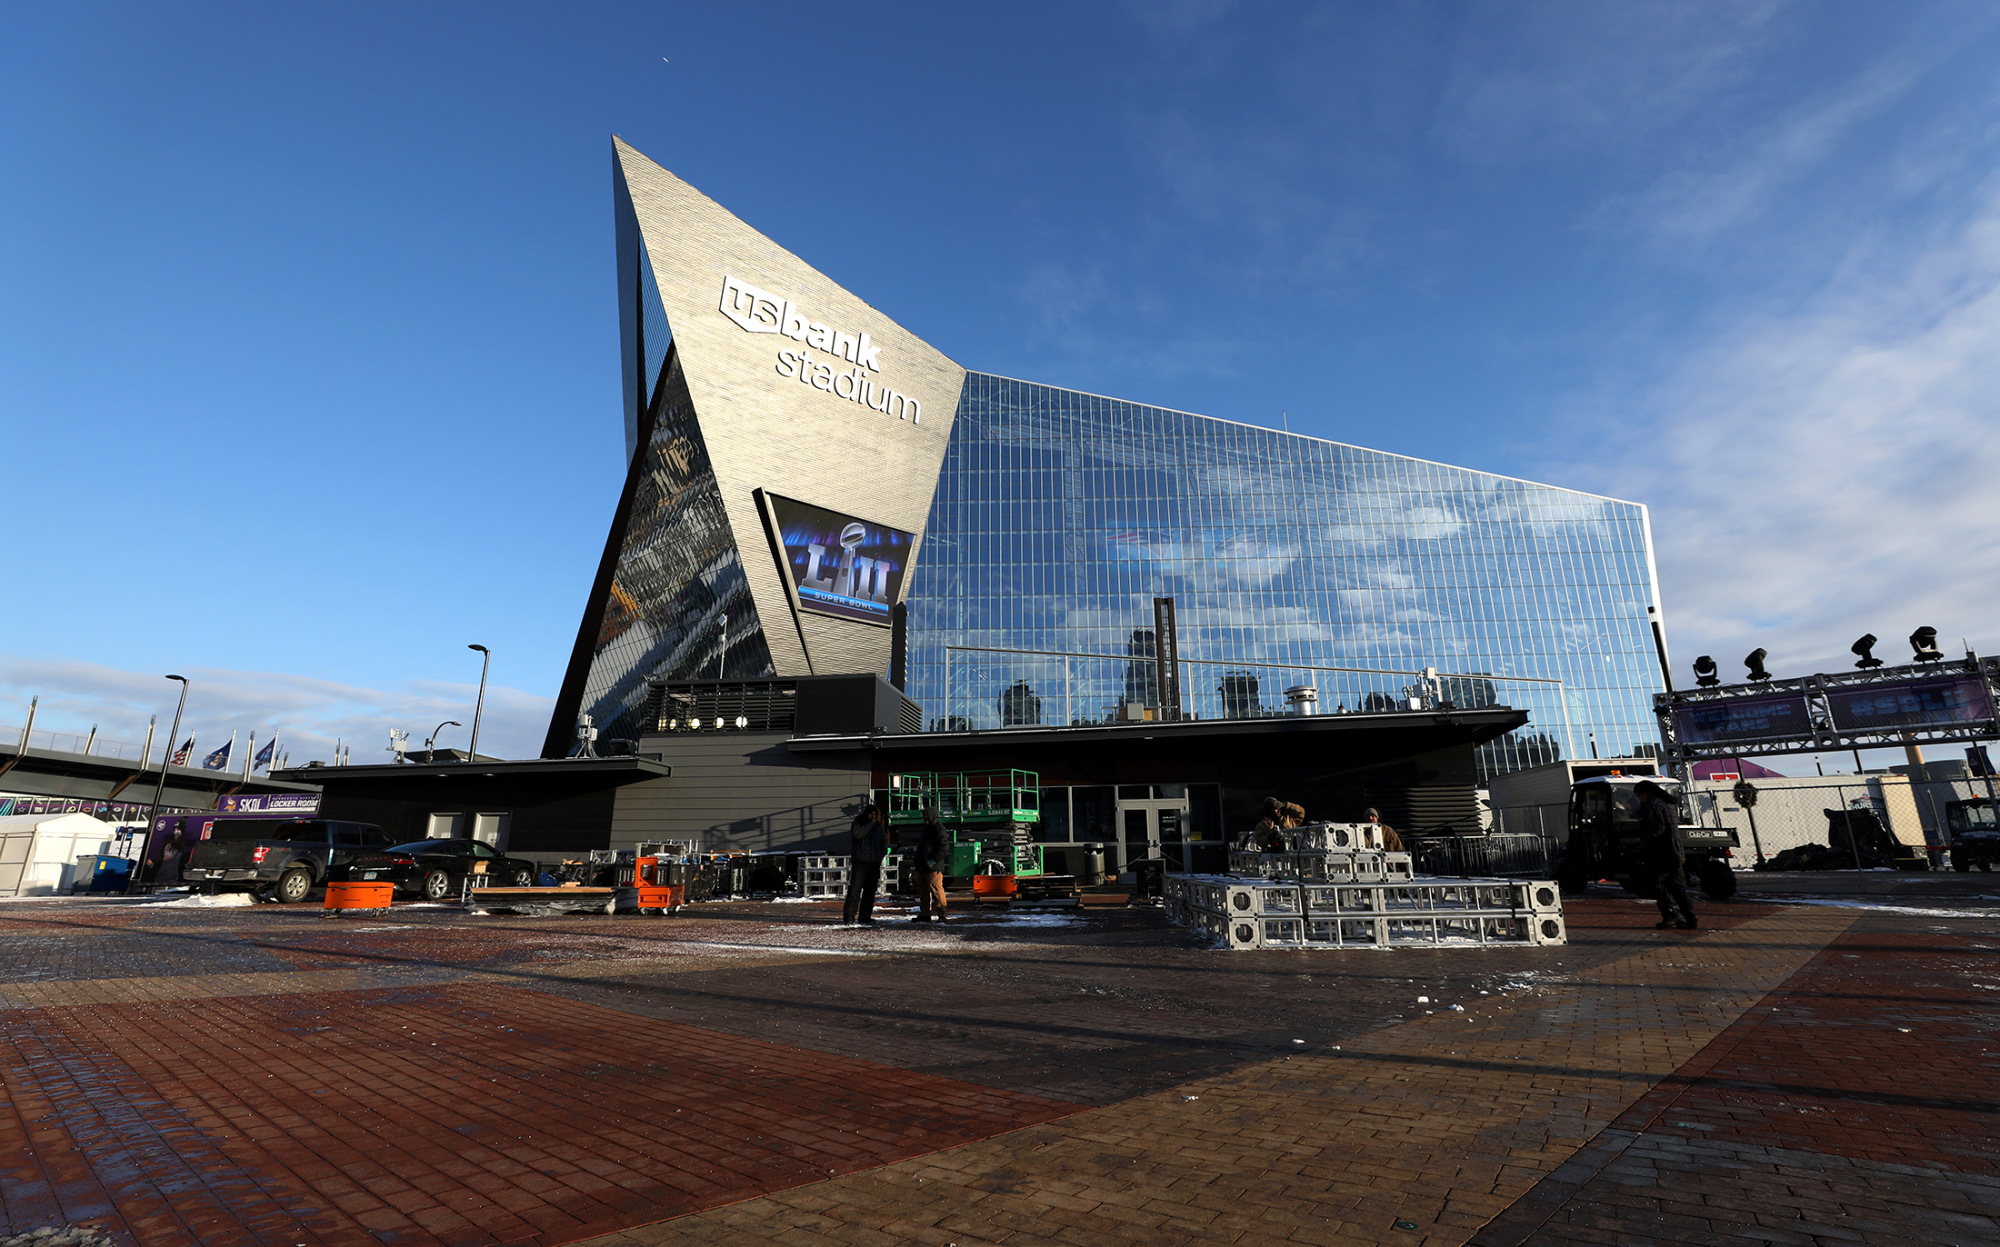 Super Bowl tickets are now a lot cheaper than a few days ago